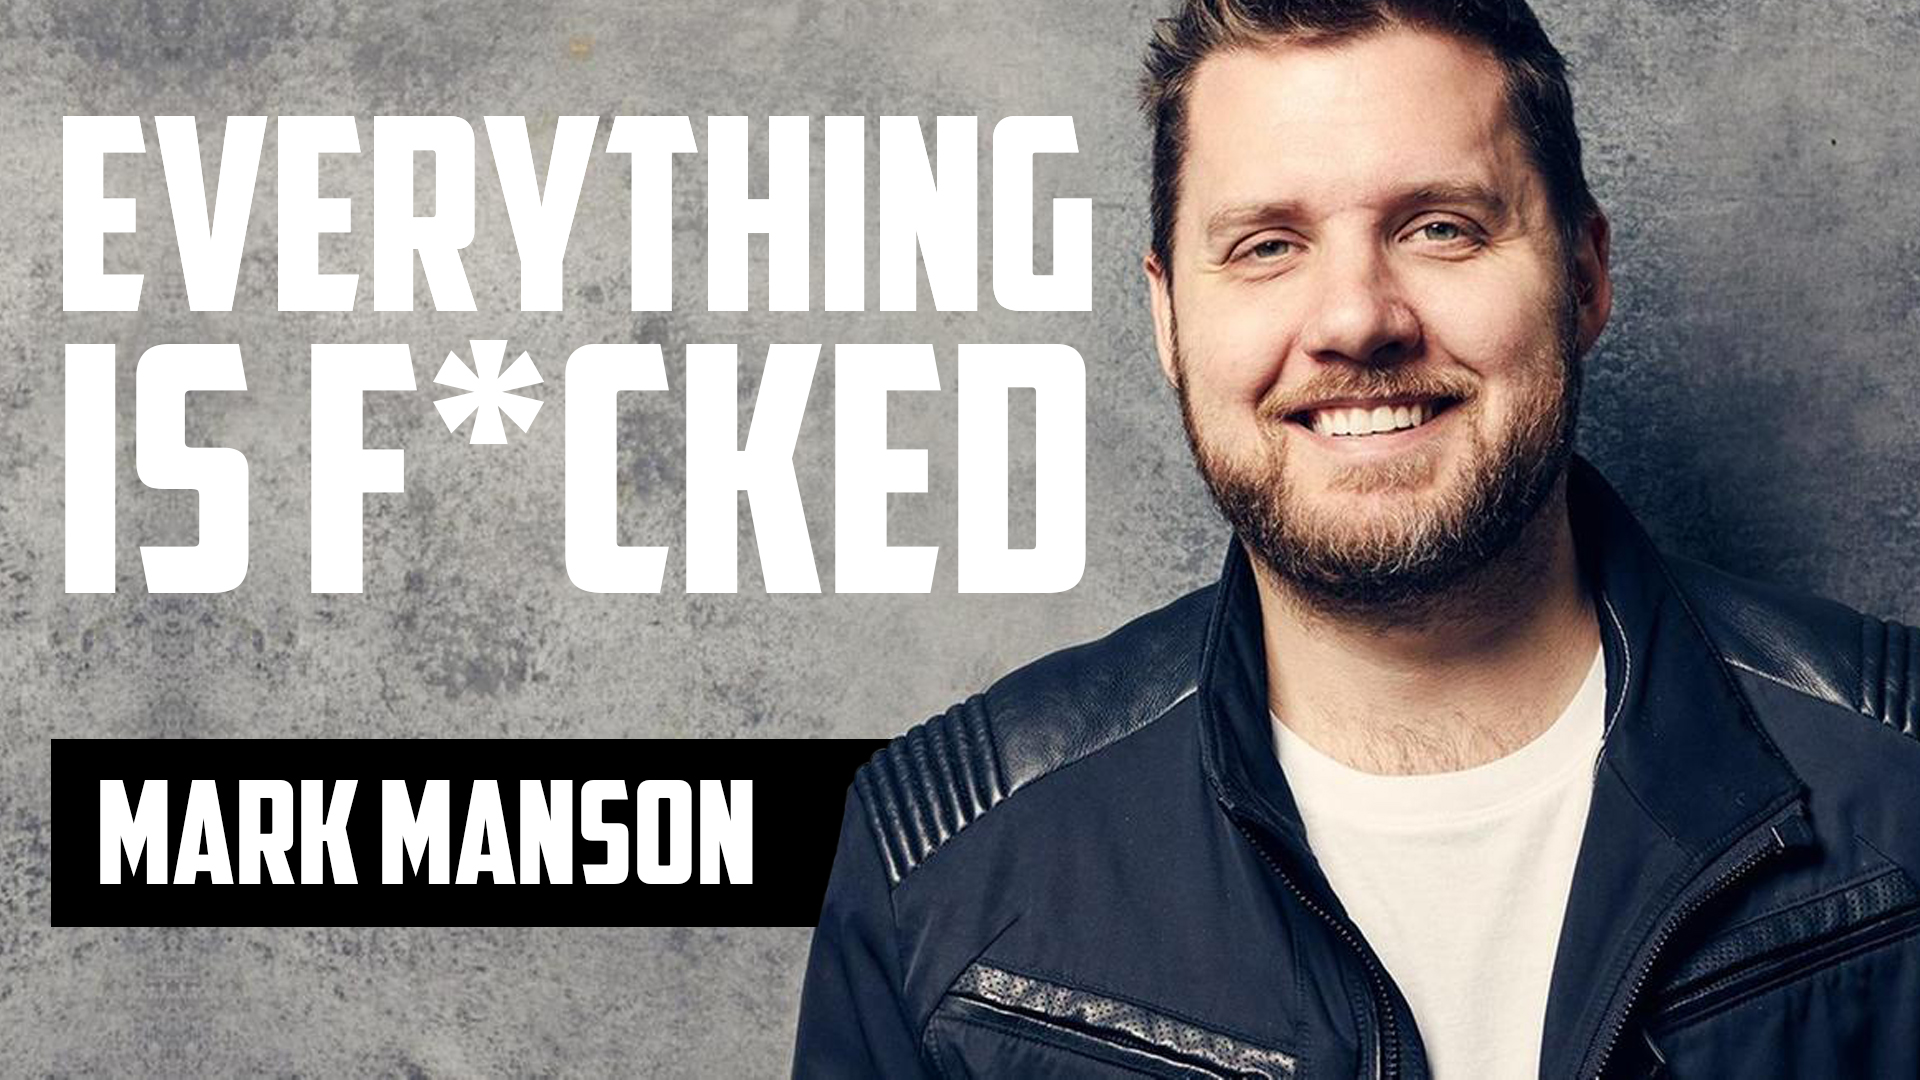 Everything is F*cked  MARK MANSON - Order of Man